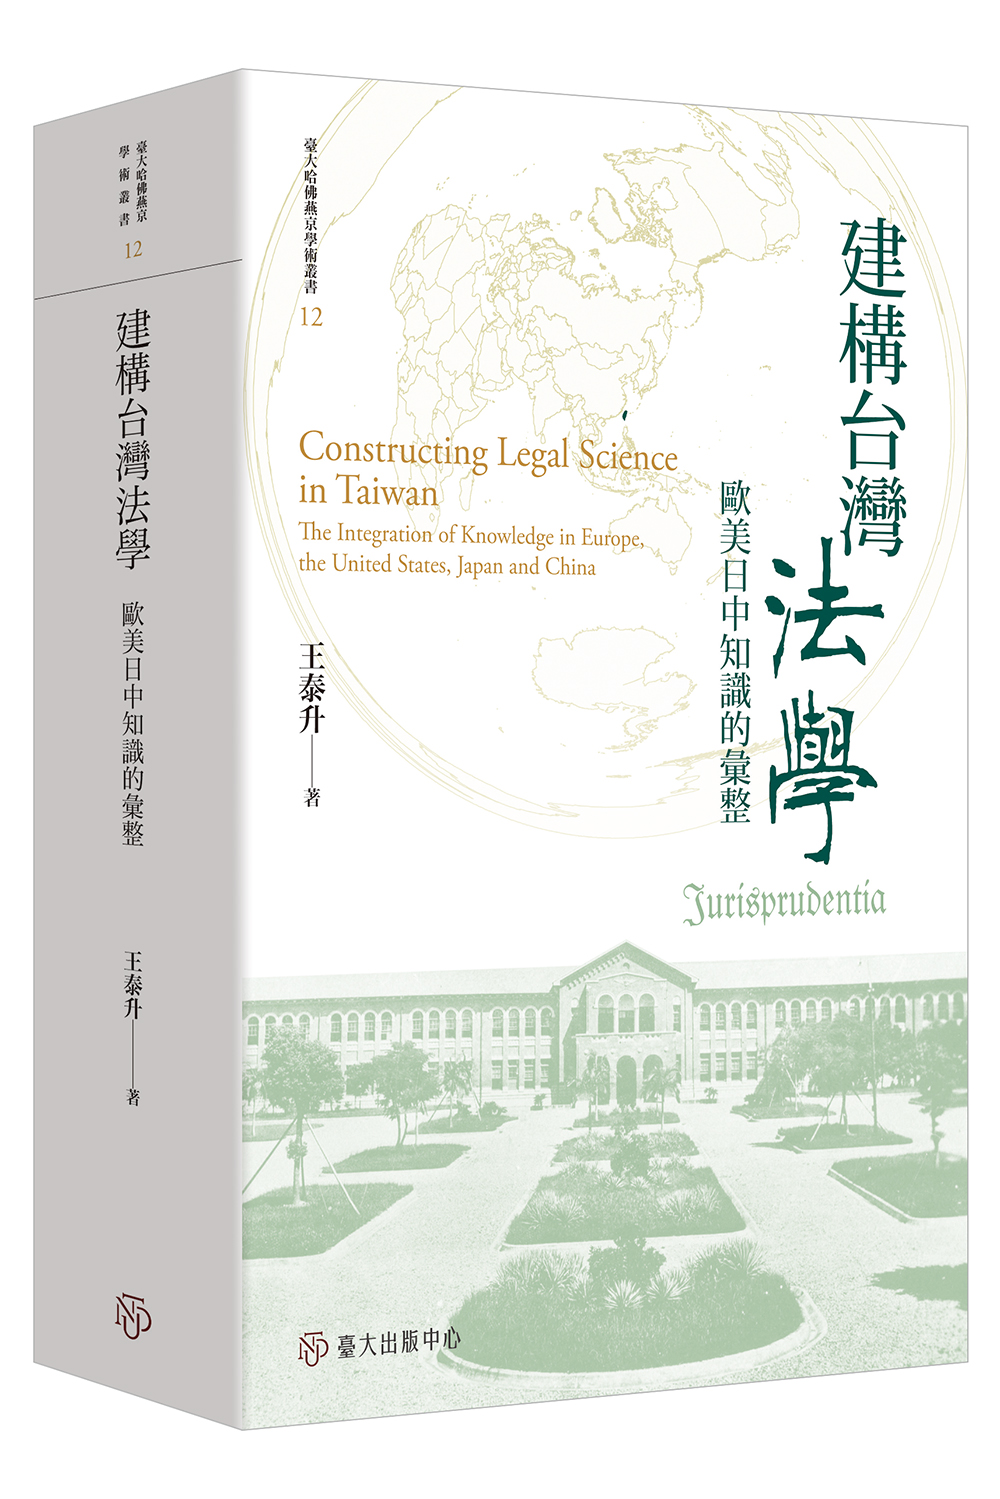 Constructing Legal Science in Taiwan: The Integration of Knowledge in Europe, the United States, Japan and China